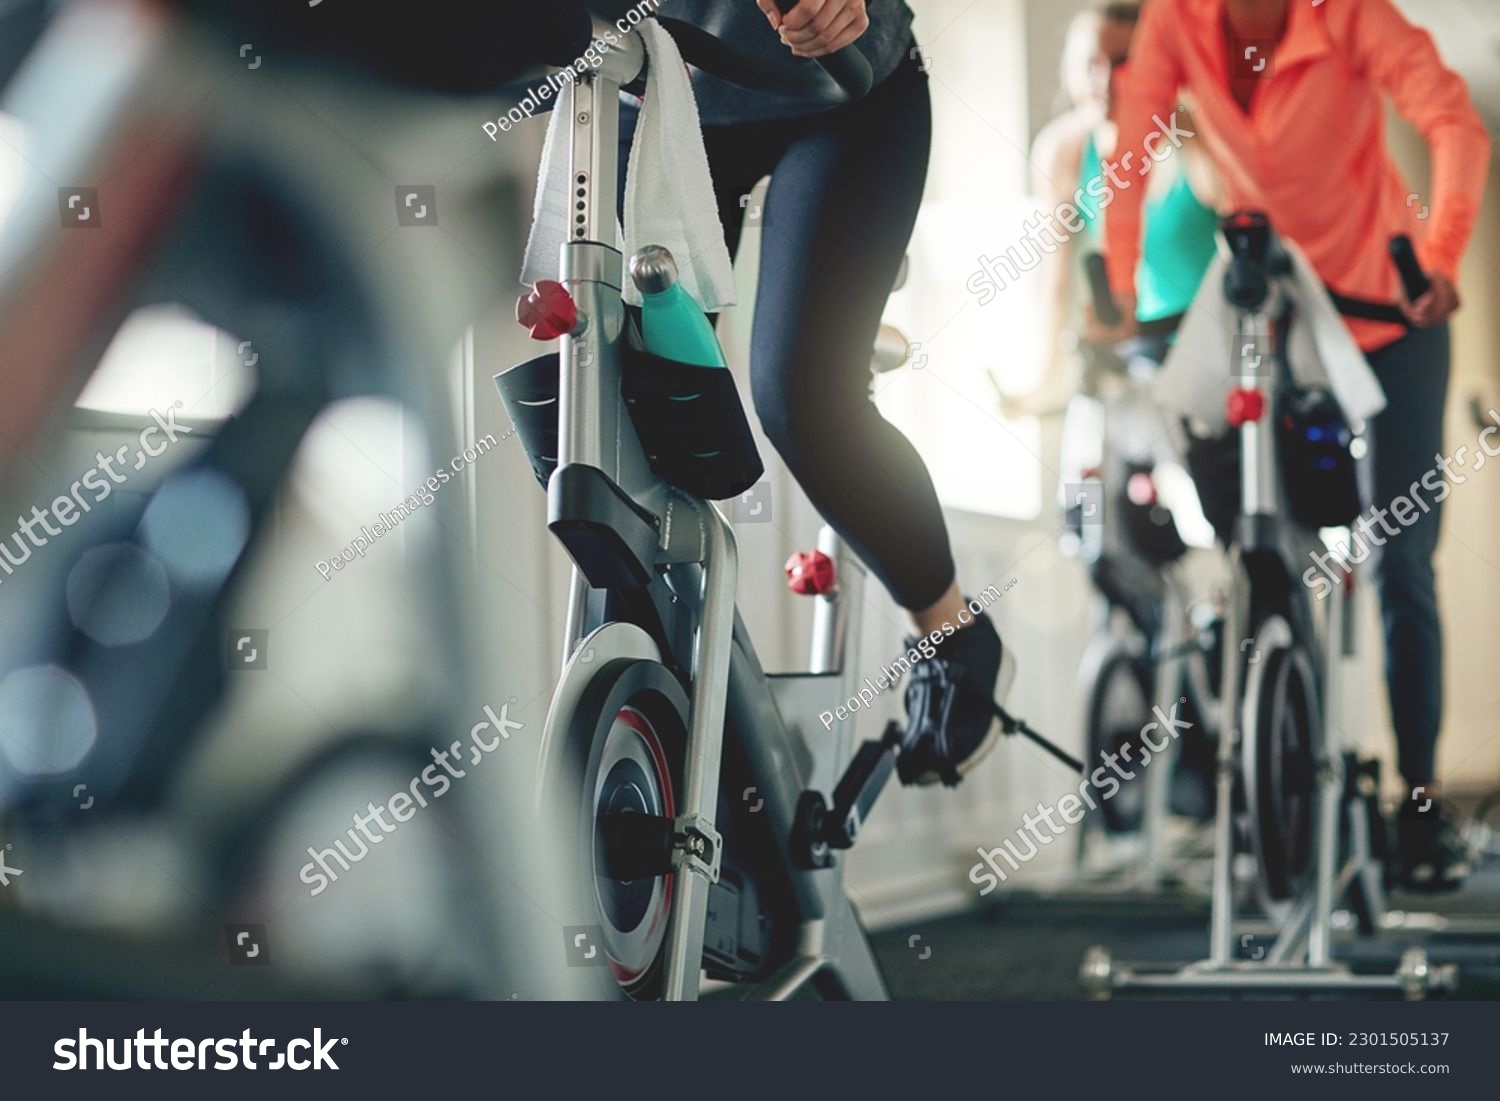 Fitness, legs and exercise bike with people in a gym for a cardio or endurance spinning class workout. Health, wellness and energy with a sporty athlete group training or cycling in a sports center #2301505137